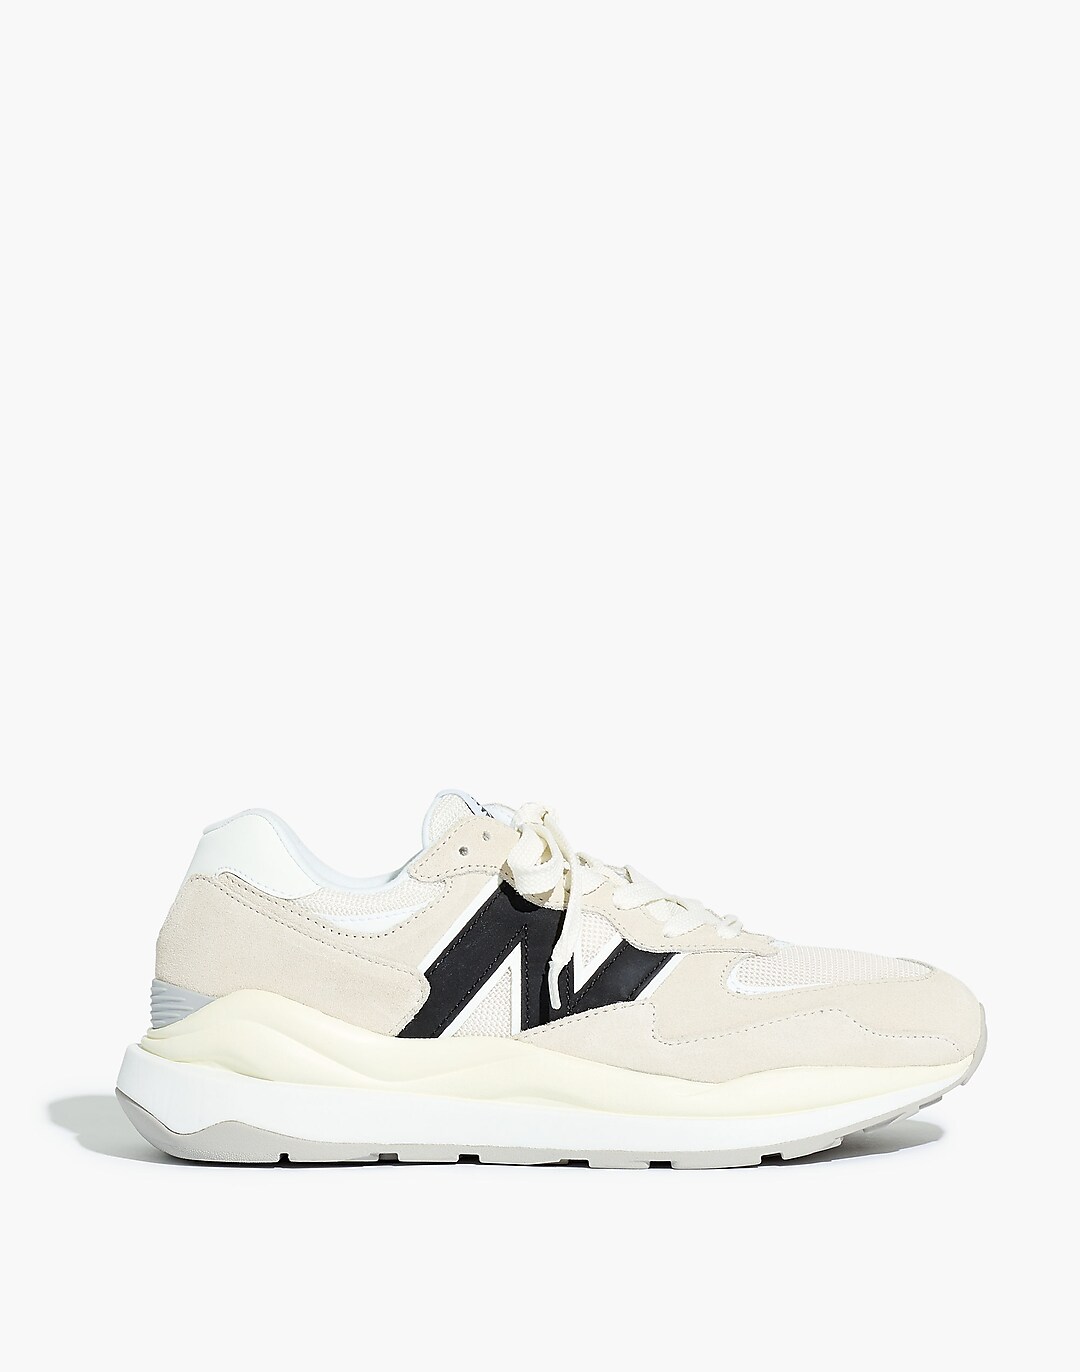 New Balance® 57/40 Sneakers in Sea Salt and Black